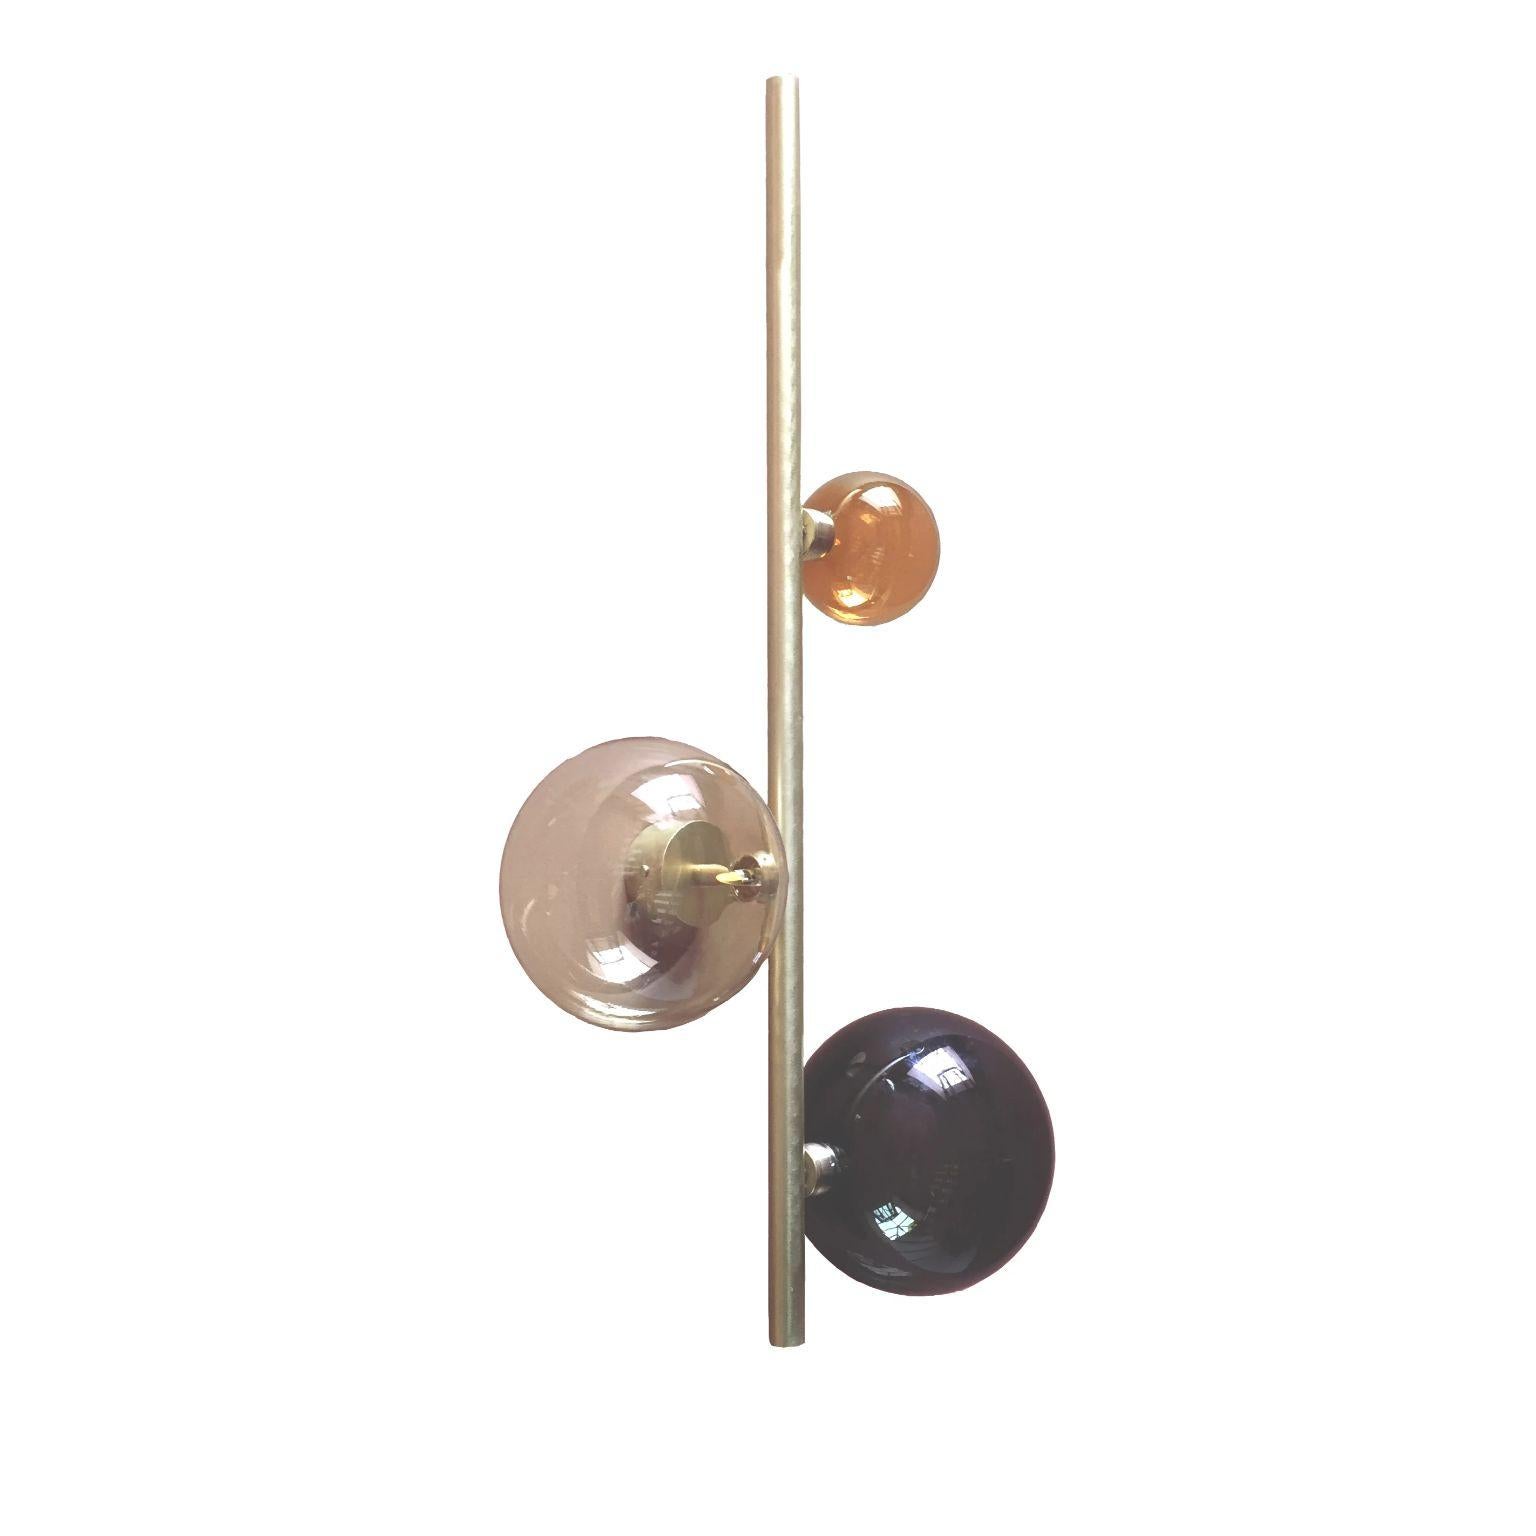 Cosmos sconce #3 by Emilie Lemardeley
Dimensions: D19 x W37 x H70 cm
Materials: brushed brass, 3 glass spheres
Weight: 3 kg

The cosmos collection references to the old occidental belief that the Earth was the center of the universe. During all